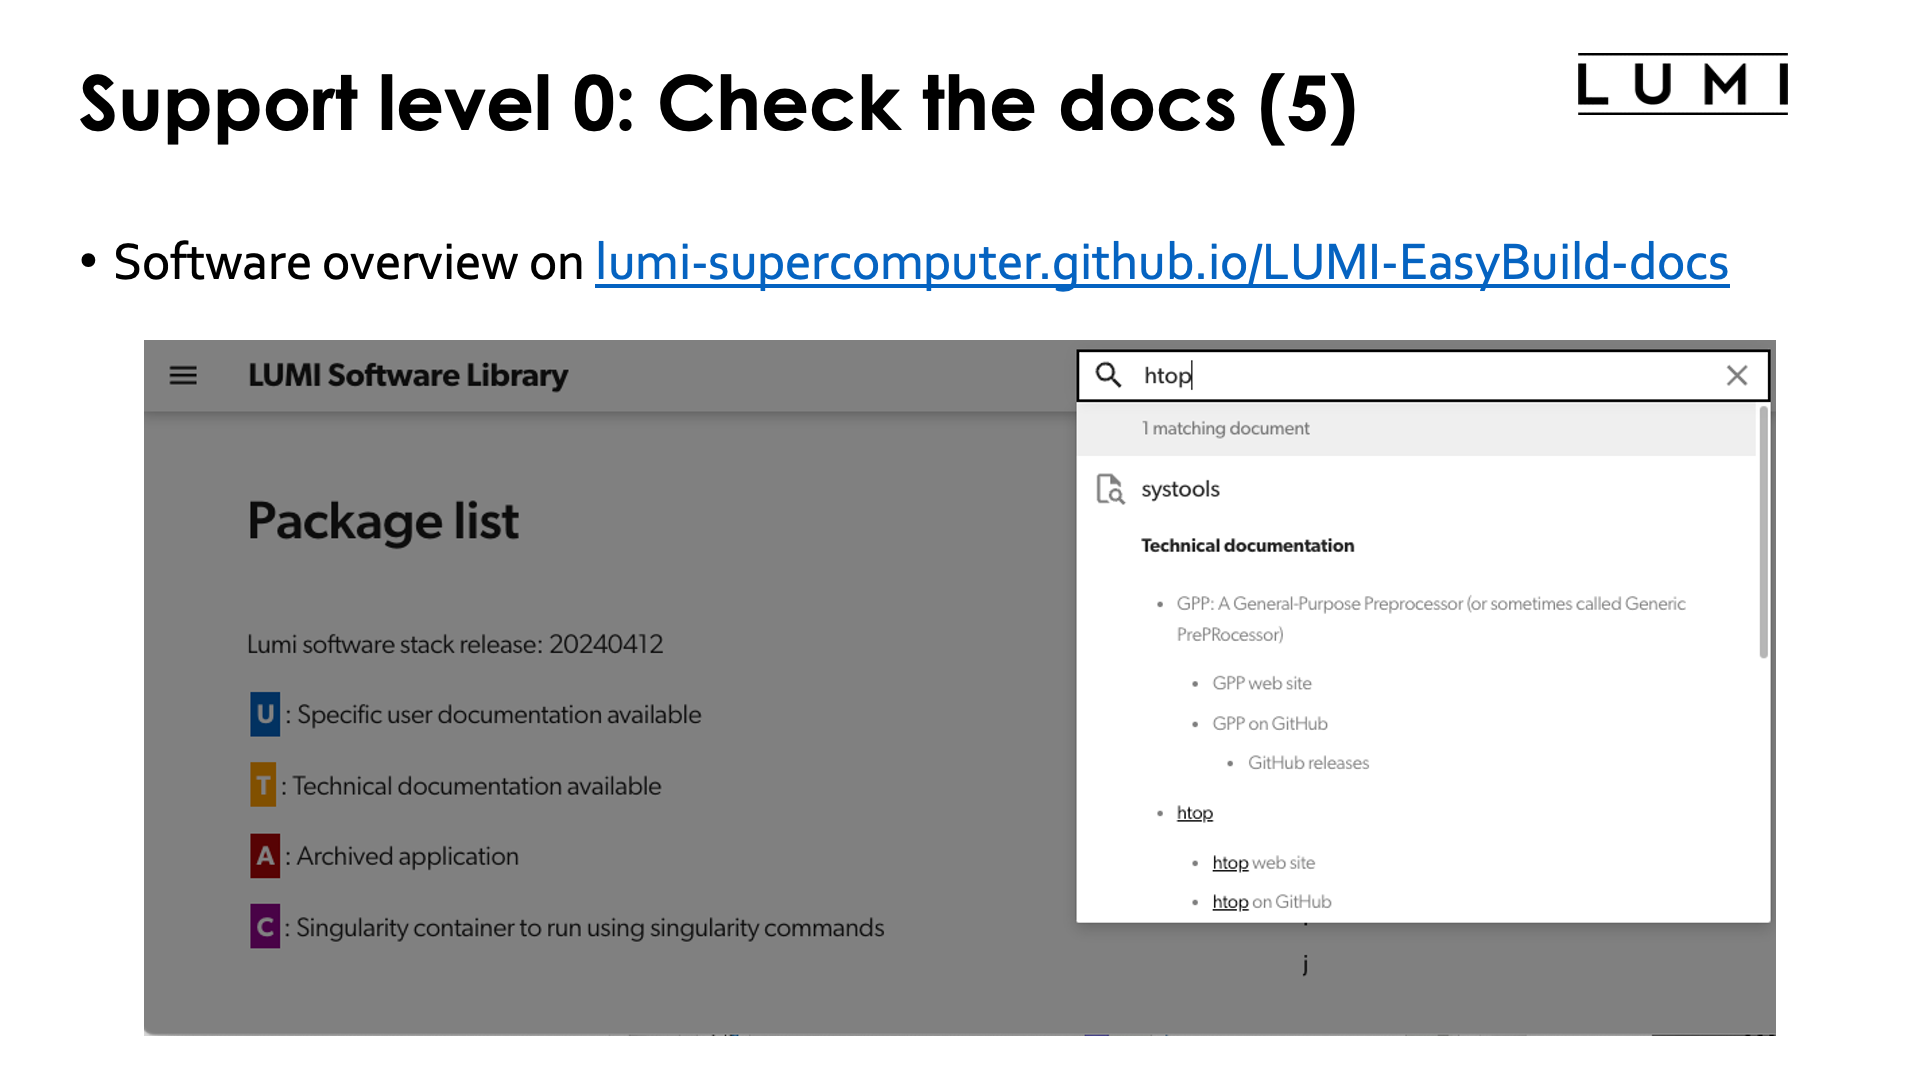 L0 support: Check the docs! (5)